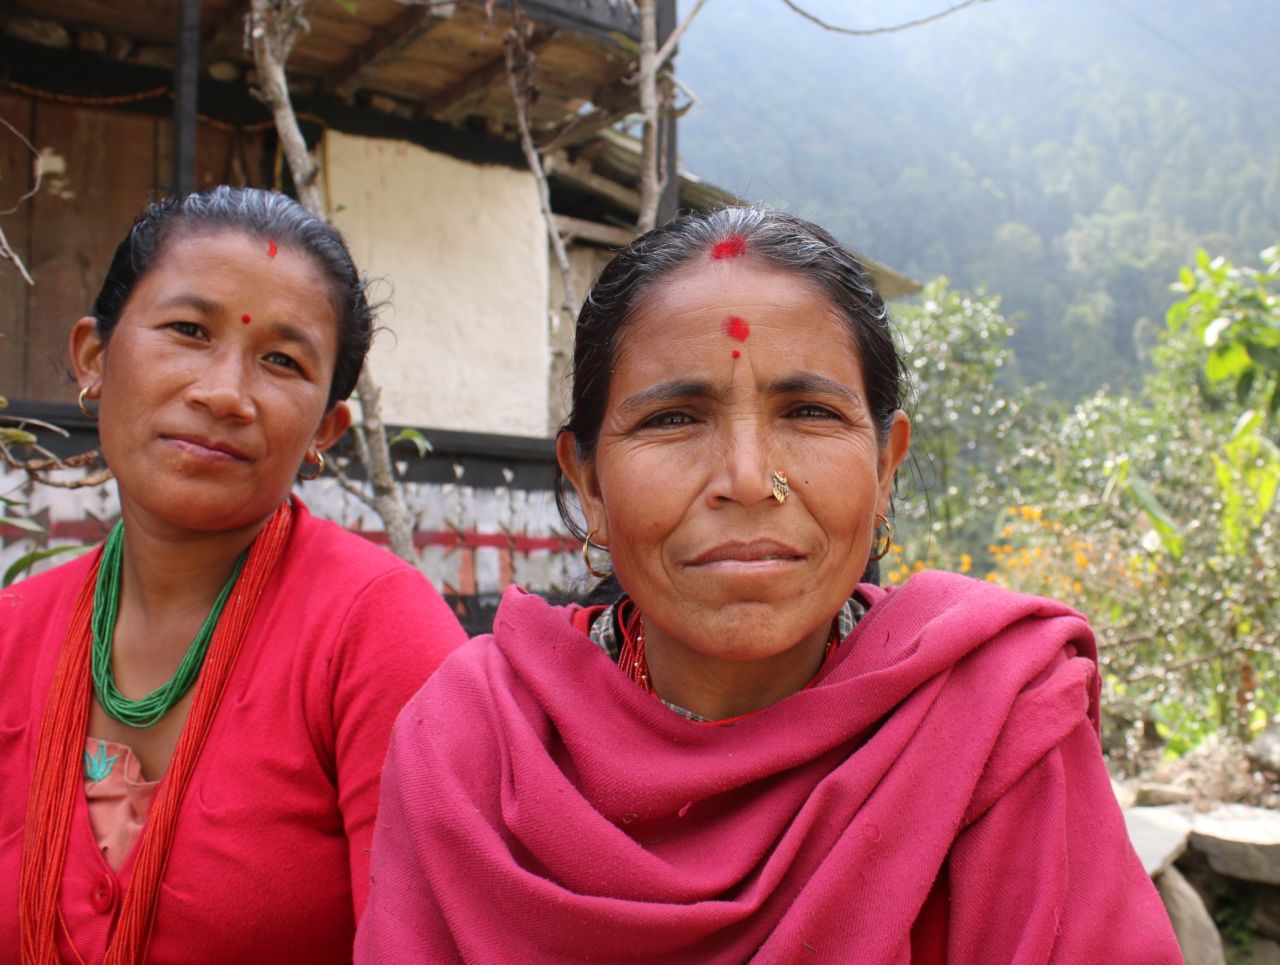 Farmers in Nepal's district of Dolakha live in one of the most vulnerable districts to landslides. Landslides could arise from melting snowpacks and loosened soil. 